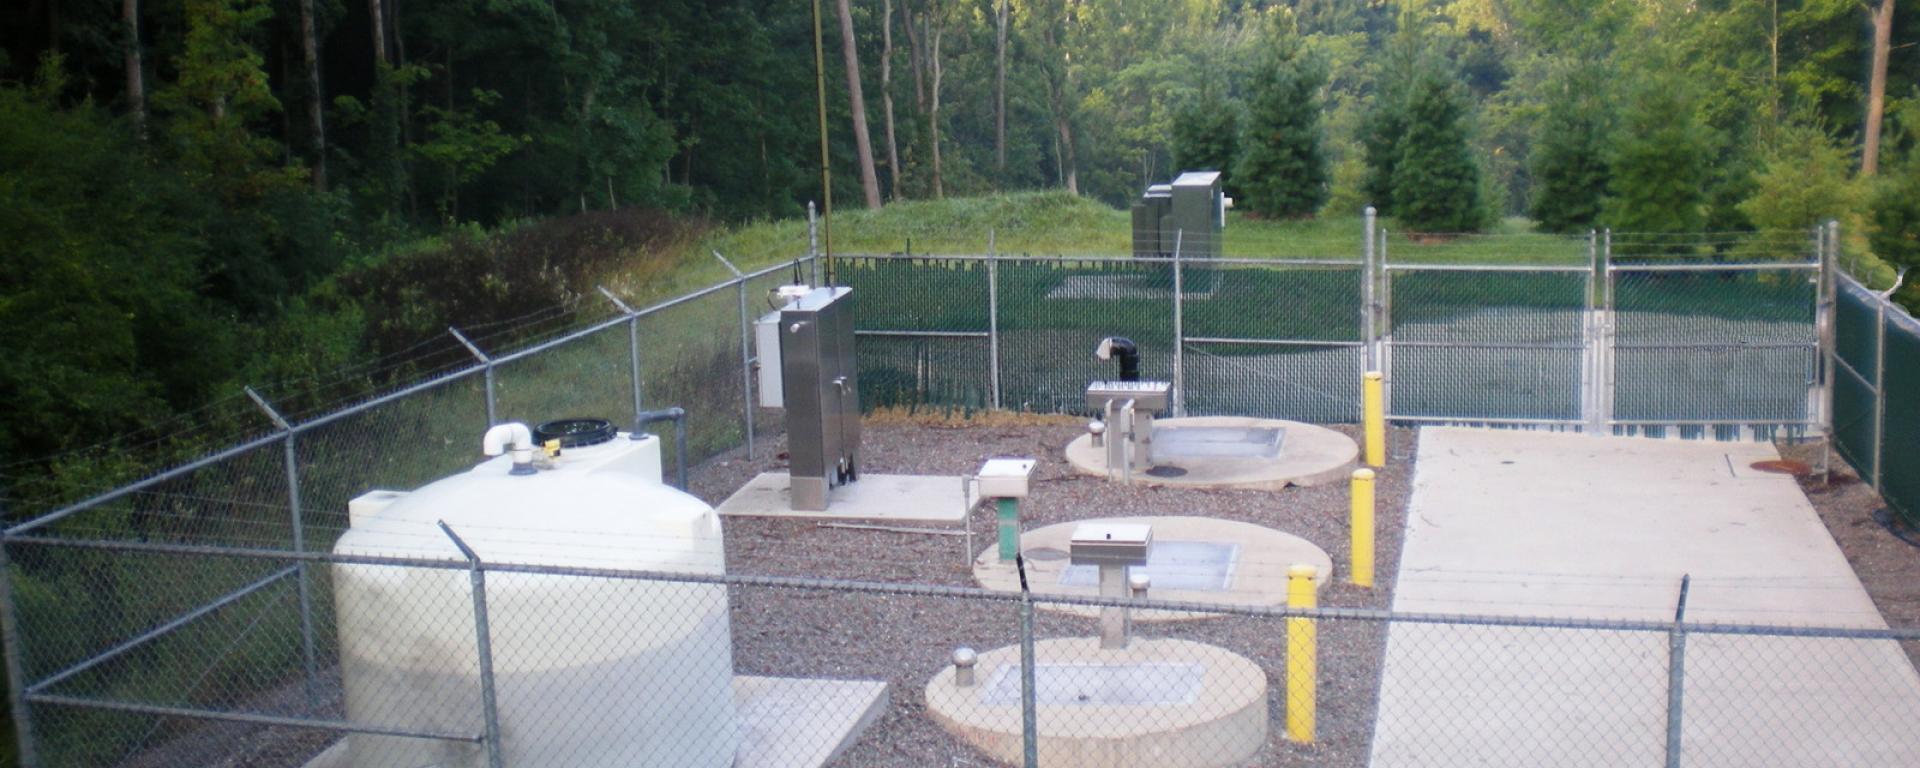 water treatment station